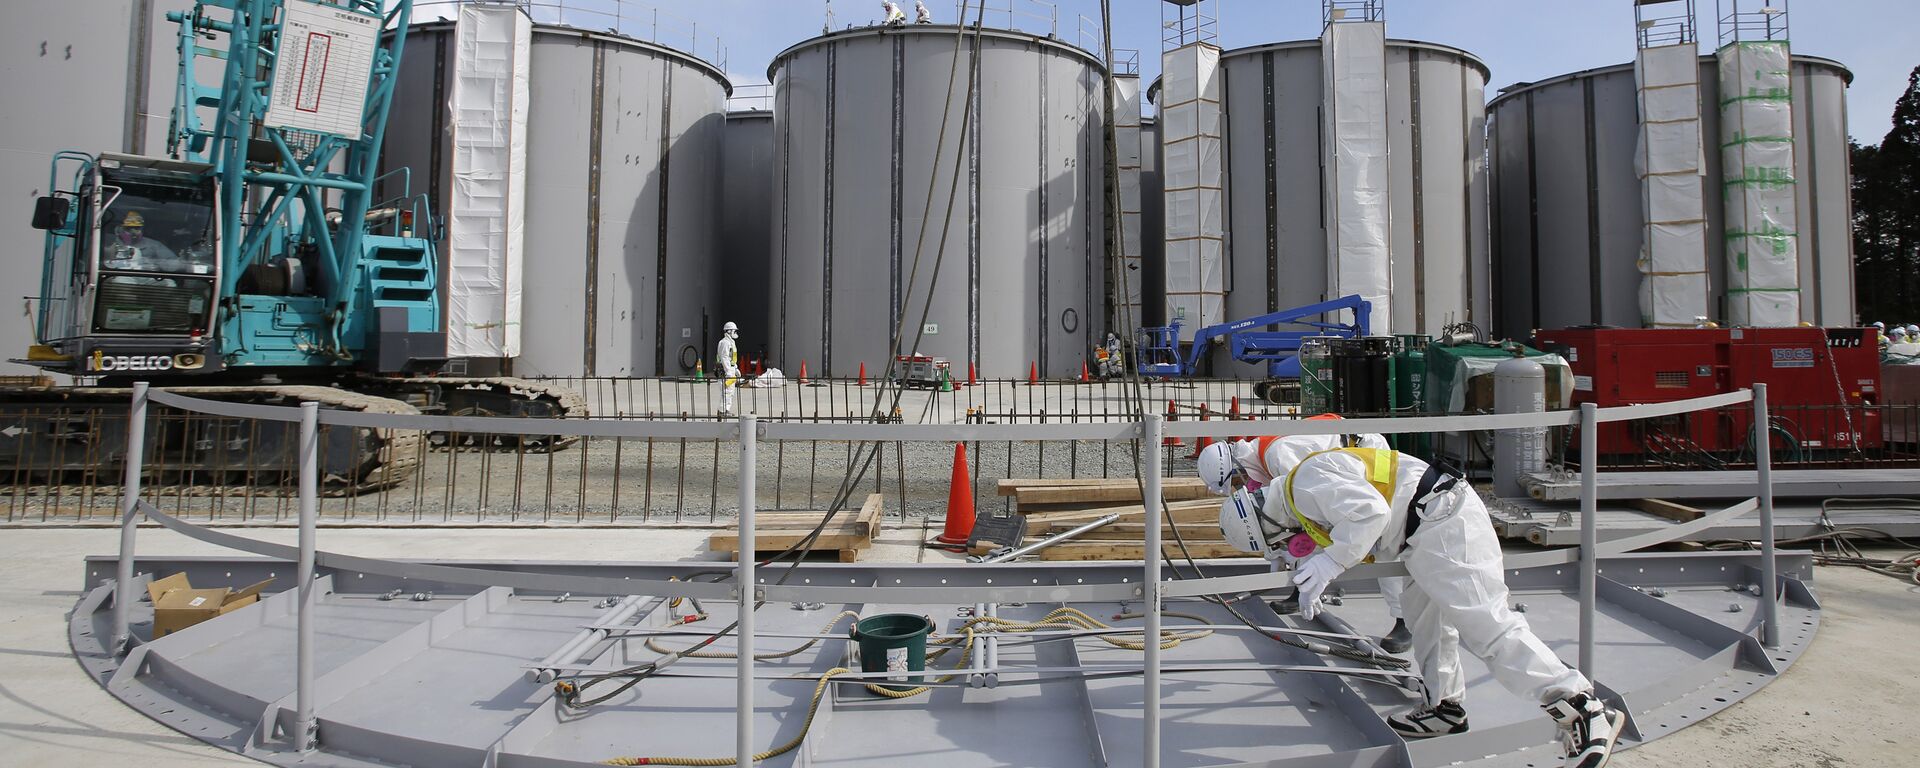 Men wearing protective suits and masks work in front of welding storage tanks for radioactive water, under construction in the J1 area at the Tokyo Electric Power Co's (TEPCO) tsunami-crippled Fukushima Daiichi nuclear power plant in Okuma in Fukushima prefecture. (File) - Sputnik International, 1920, 19.08.2023